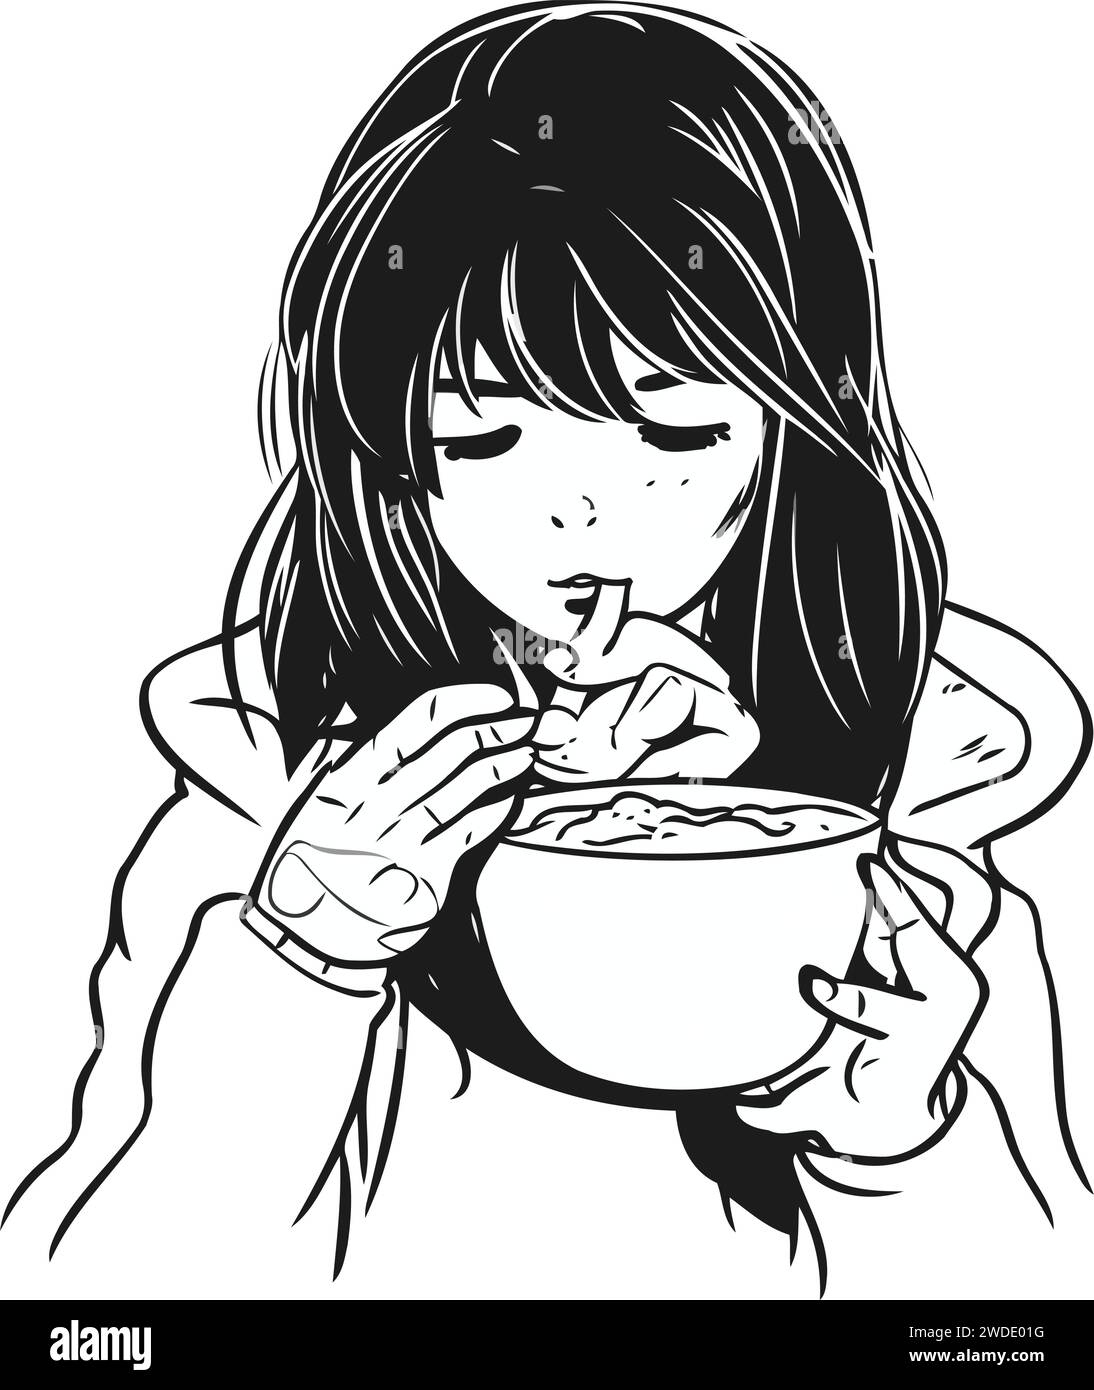 Illustration of a cute girl eating instant noodle in a bowl Stock Vector